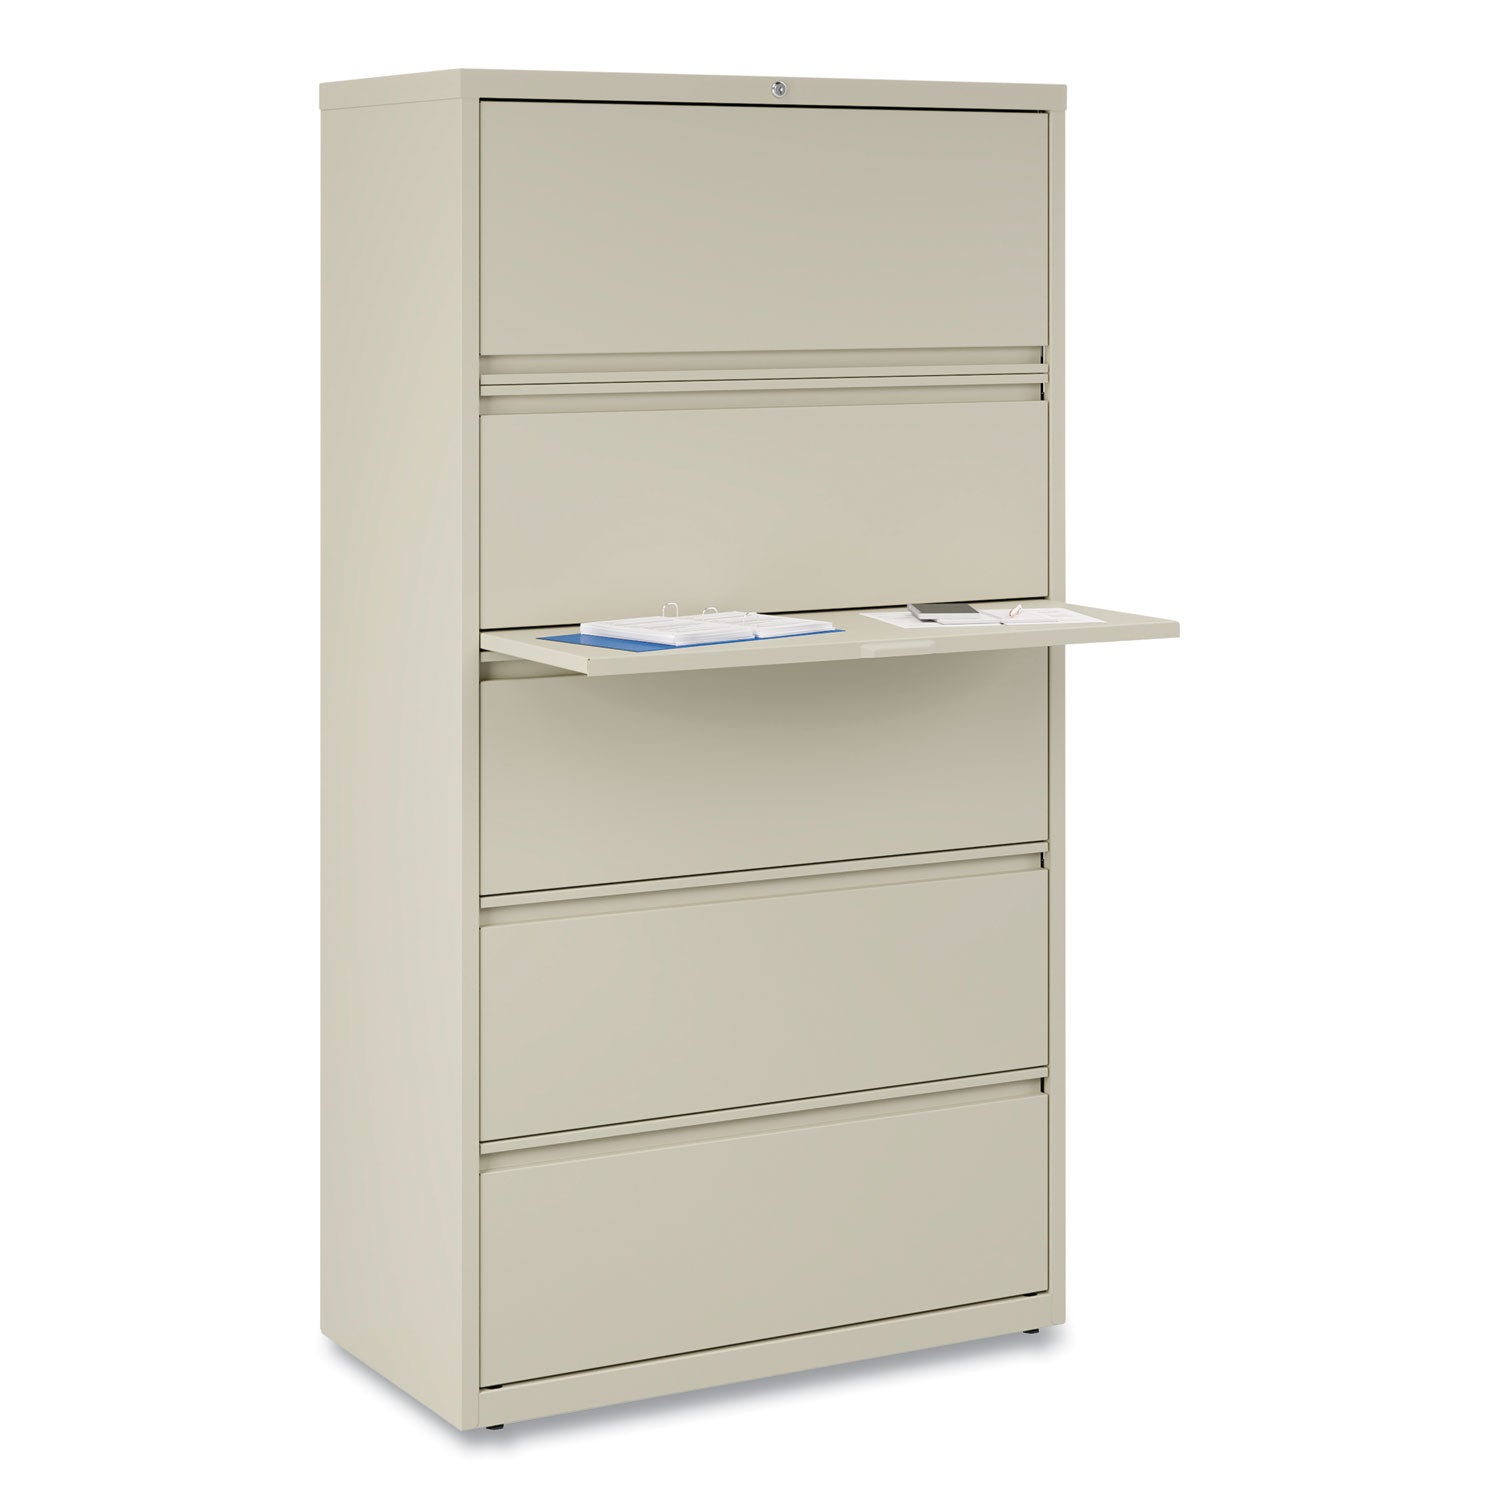 lateral-file-5-legal-letter-a4-a5-size-file-drawers-putty-36-x-1863-x-6763_alehlf3667py - 8